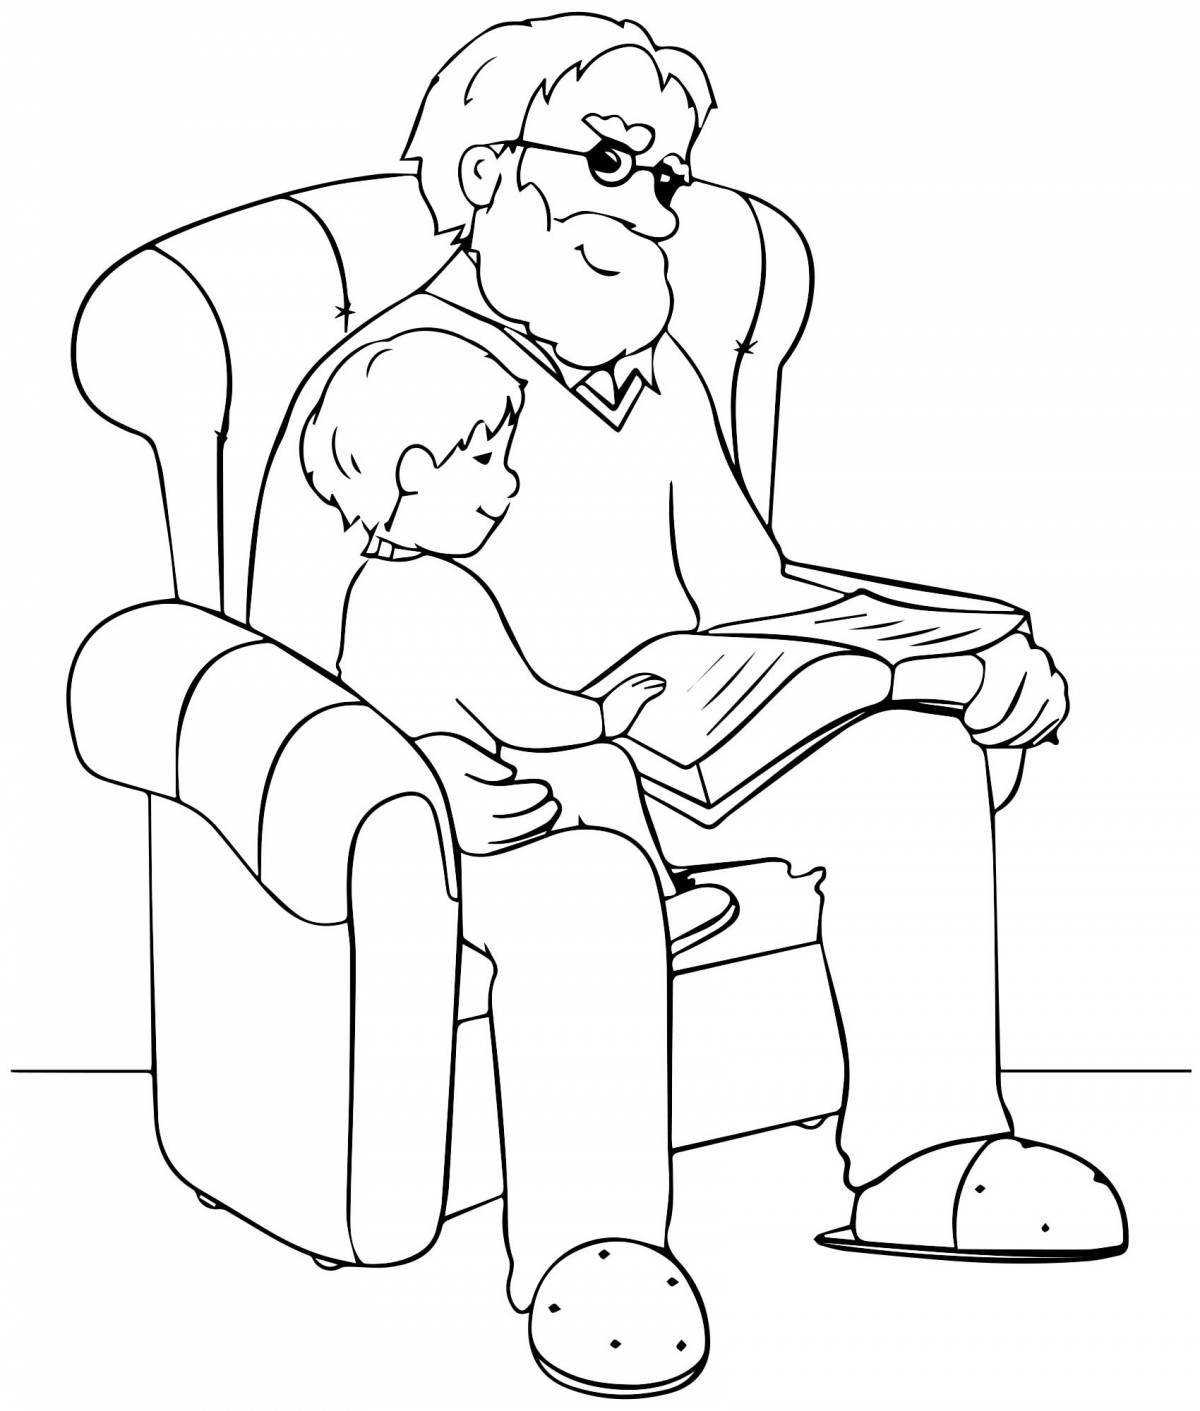 Comforting coloring book for the elderly